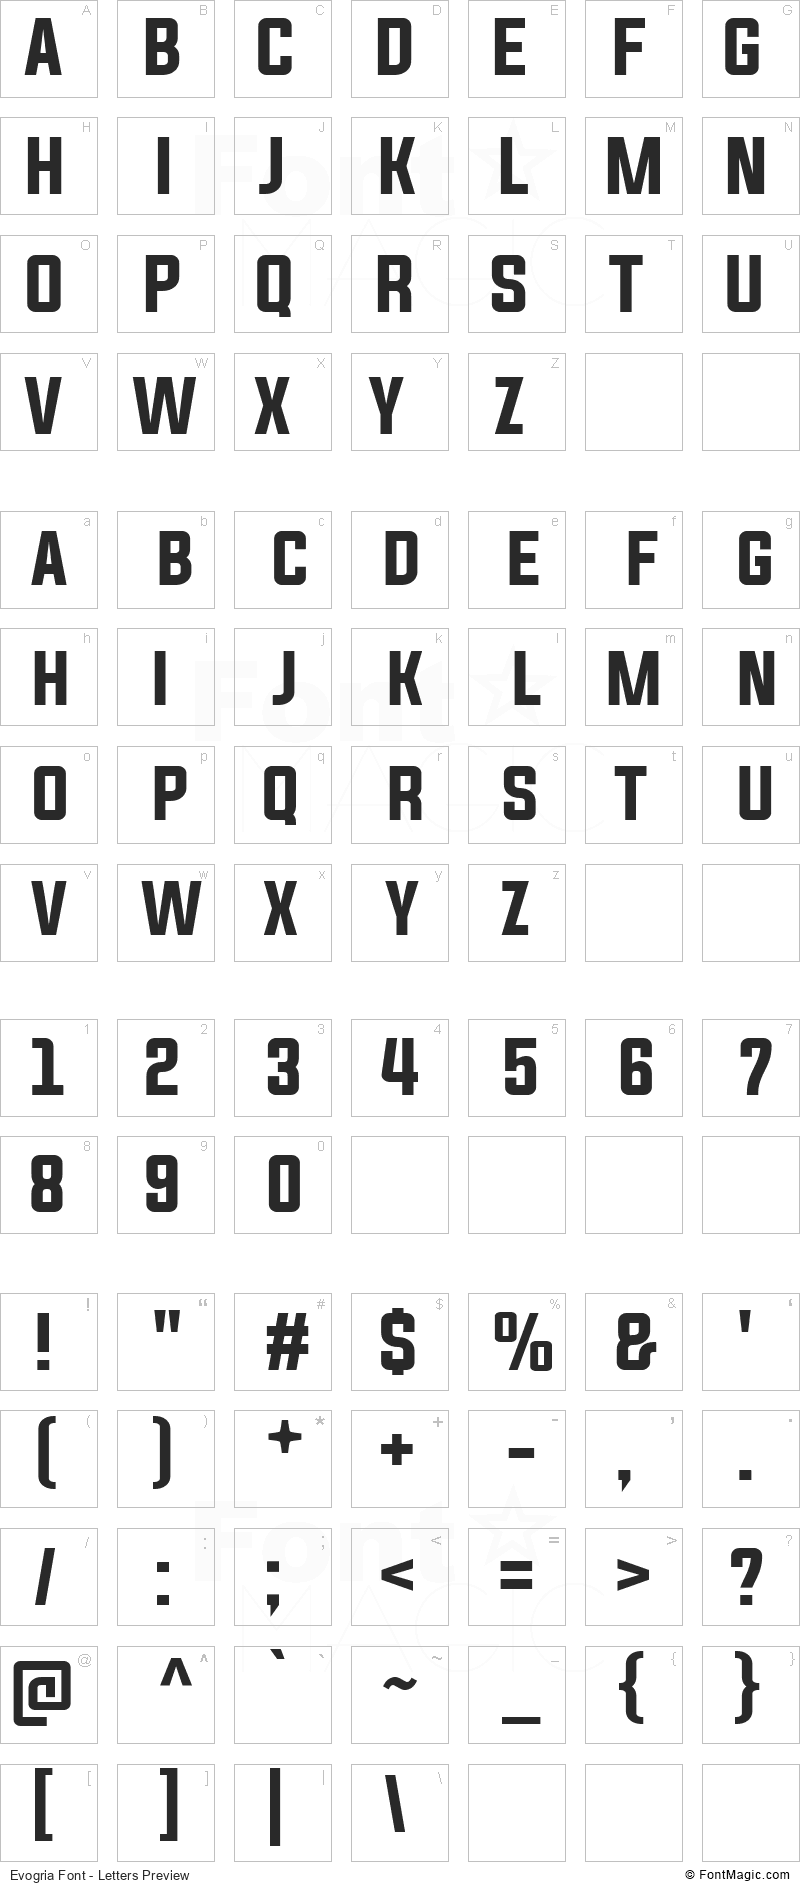 Evogria Font - All Latters Preview Chart